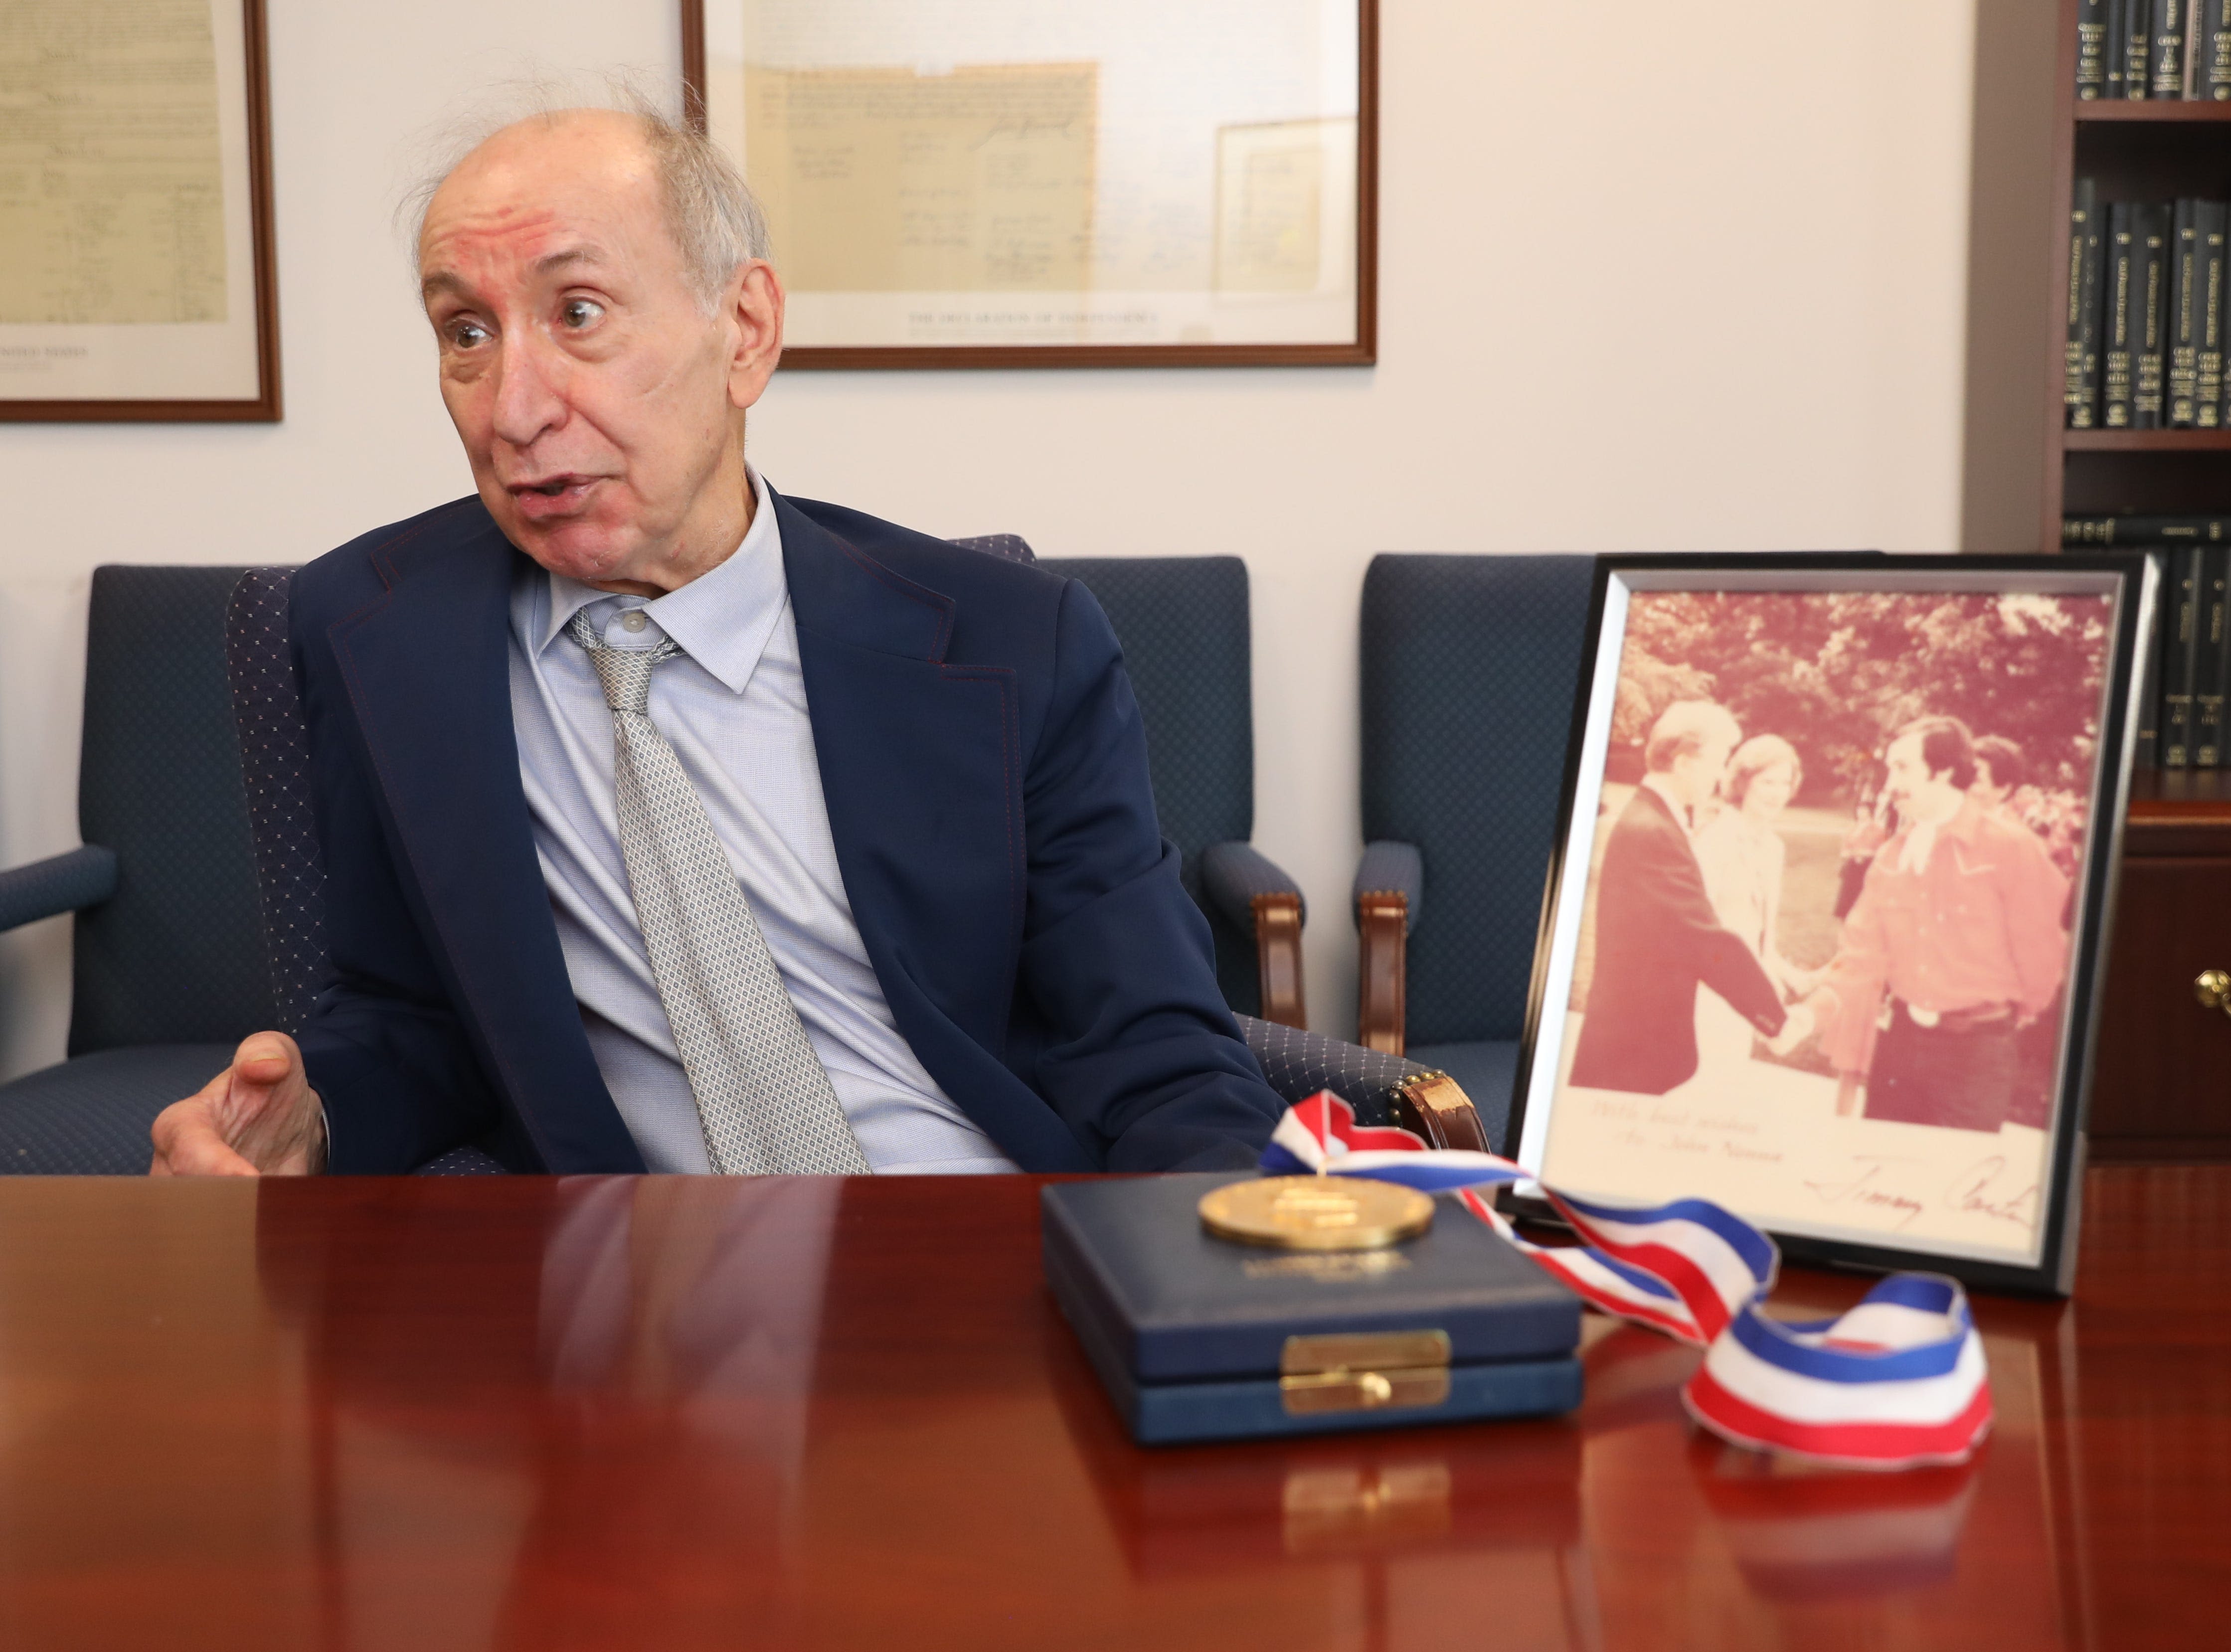 Westchester's county attorney reflects on his Olympics experience in Munich in 1972